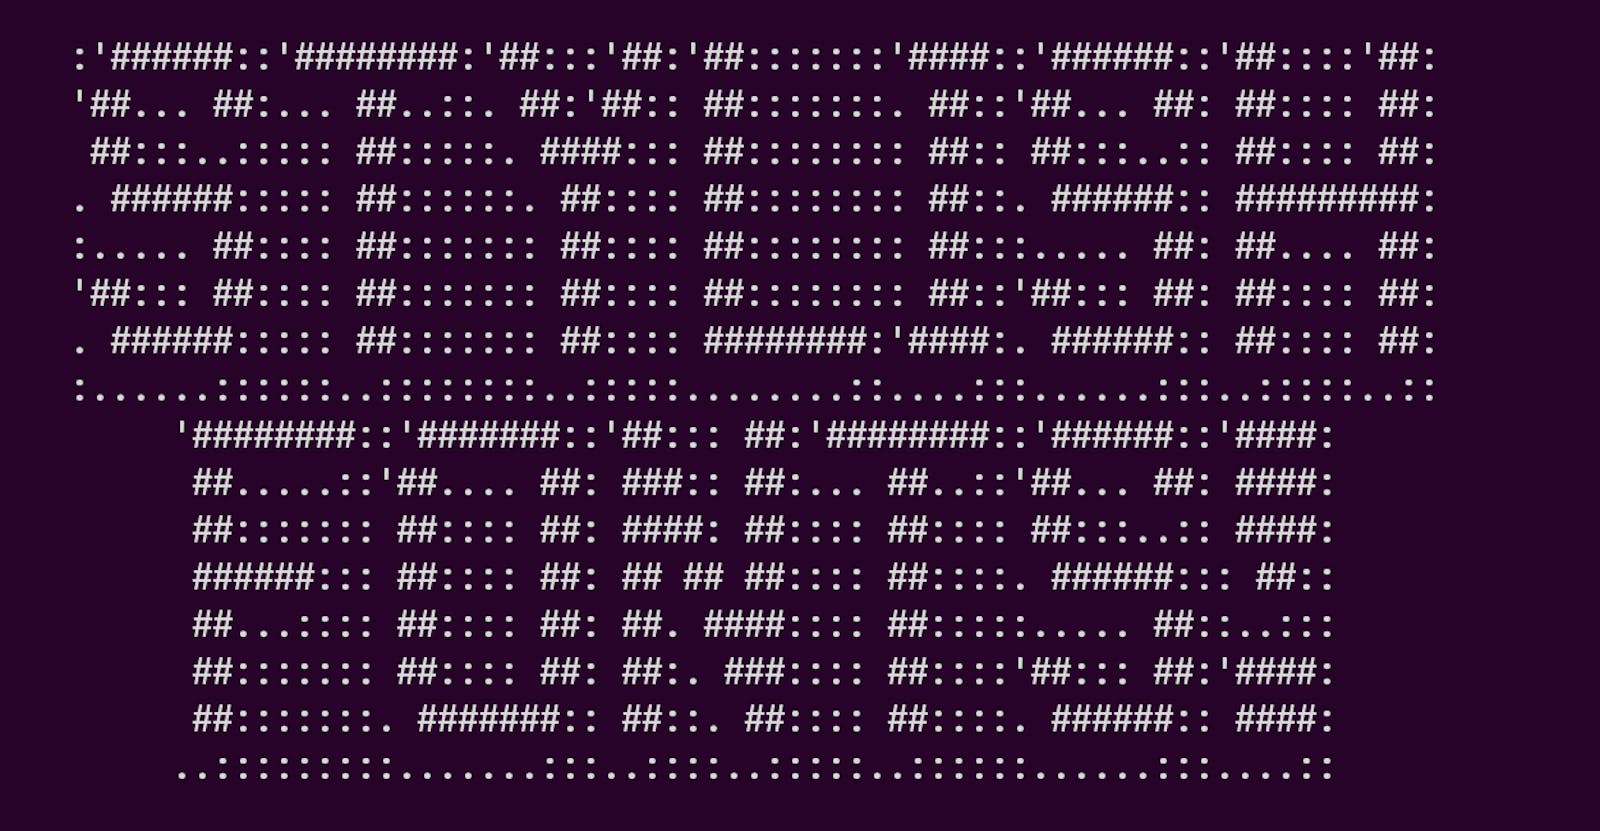 The Practical Way to Visualize Stylish Fonts in the Command Line